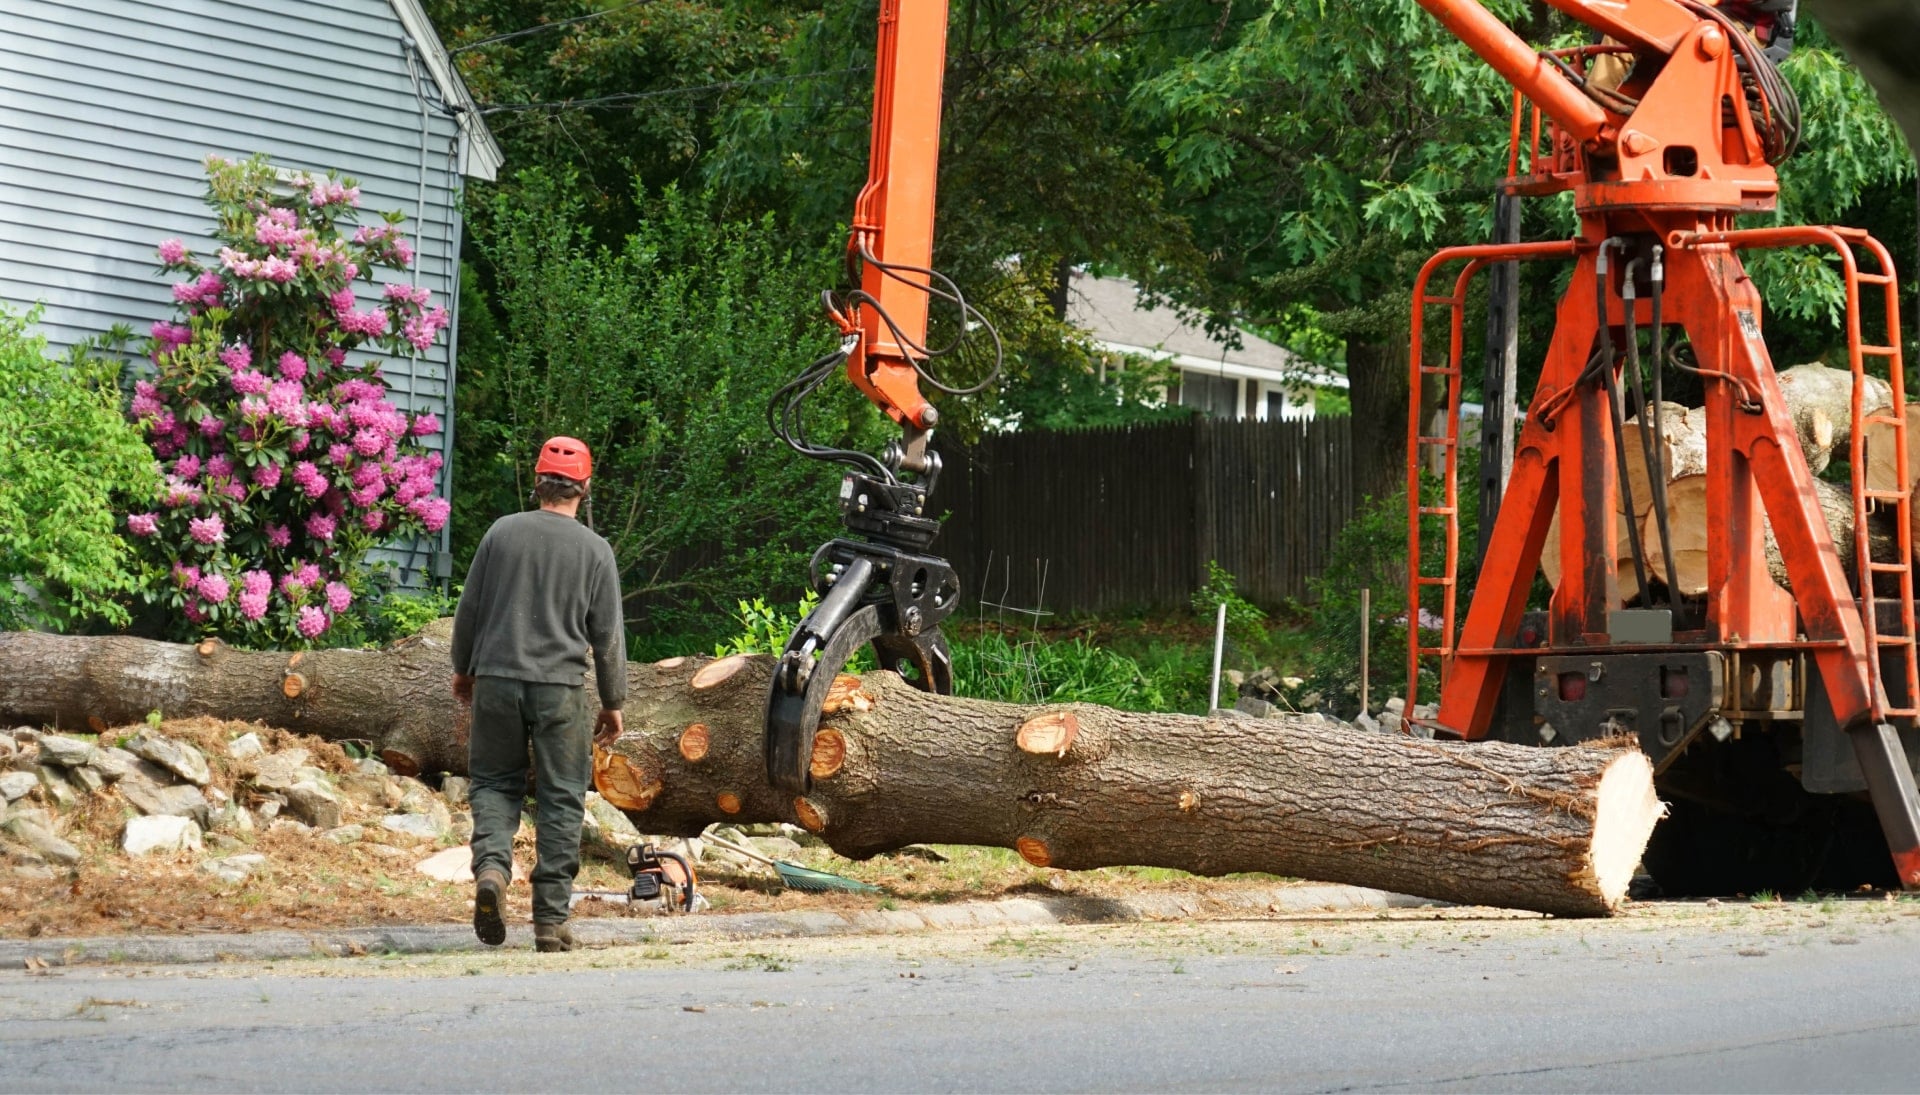 Local partner for Tree removal services in Las Vegas